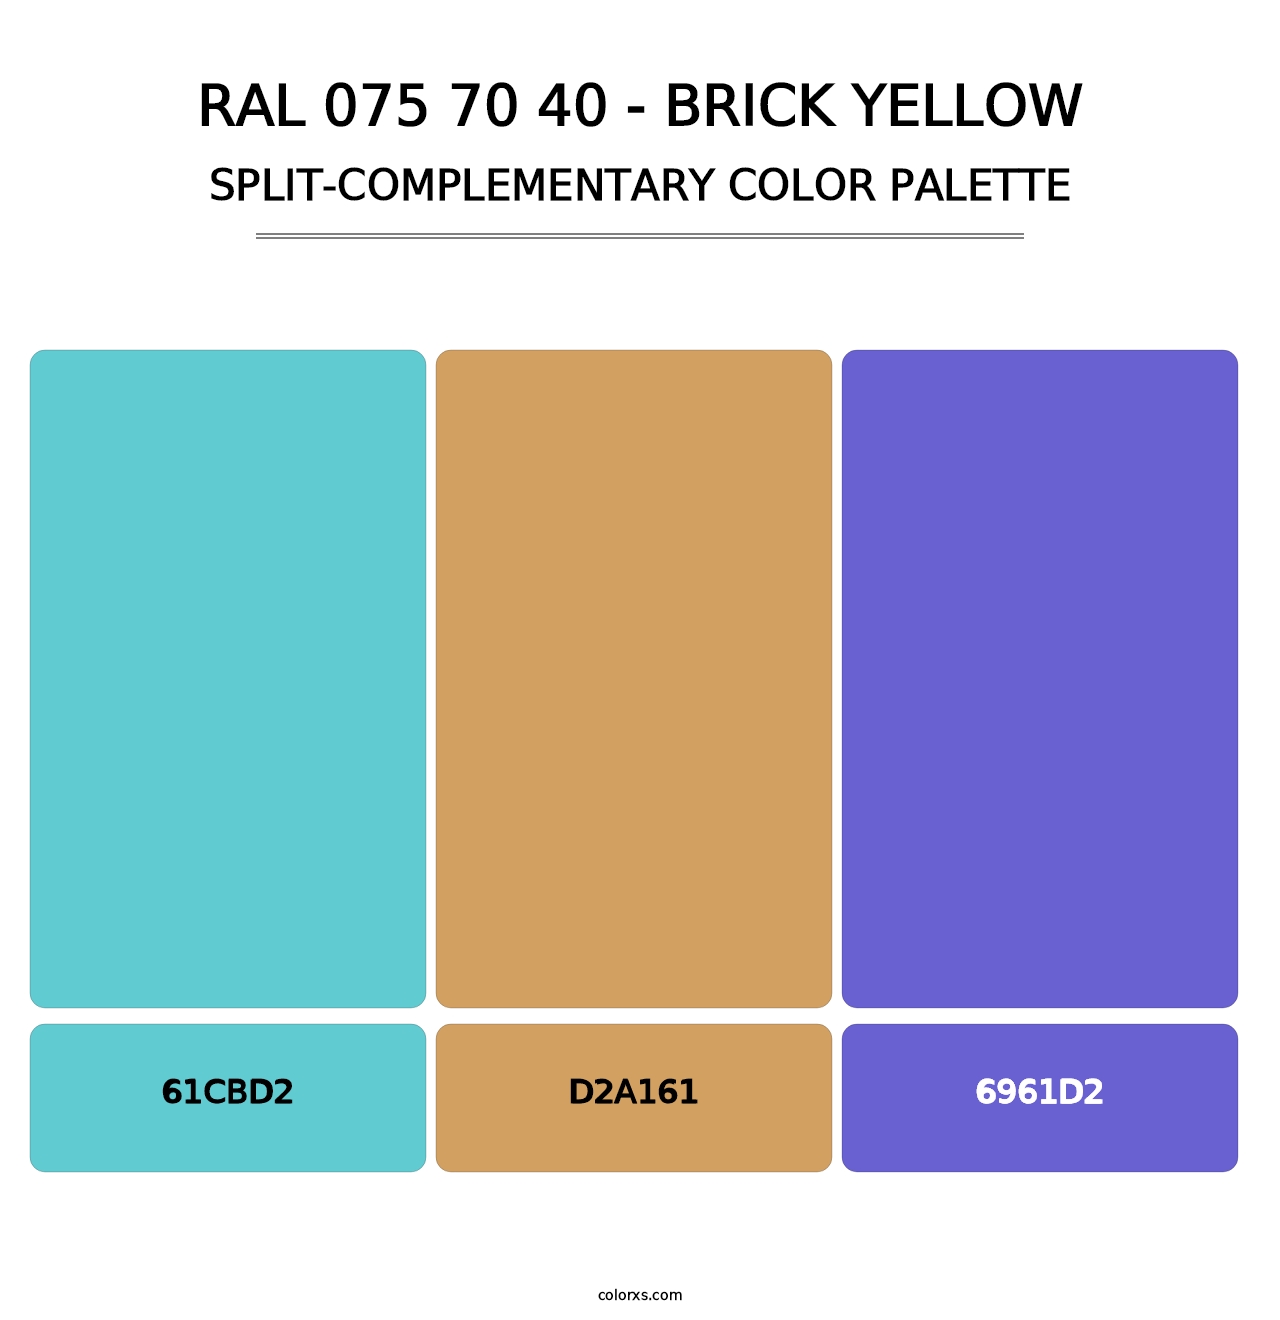 RAL 075 70 40 - Brick Yellow - Split-Complementary Color Palette